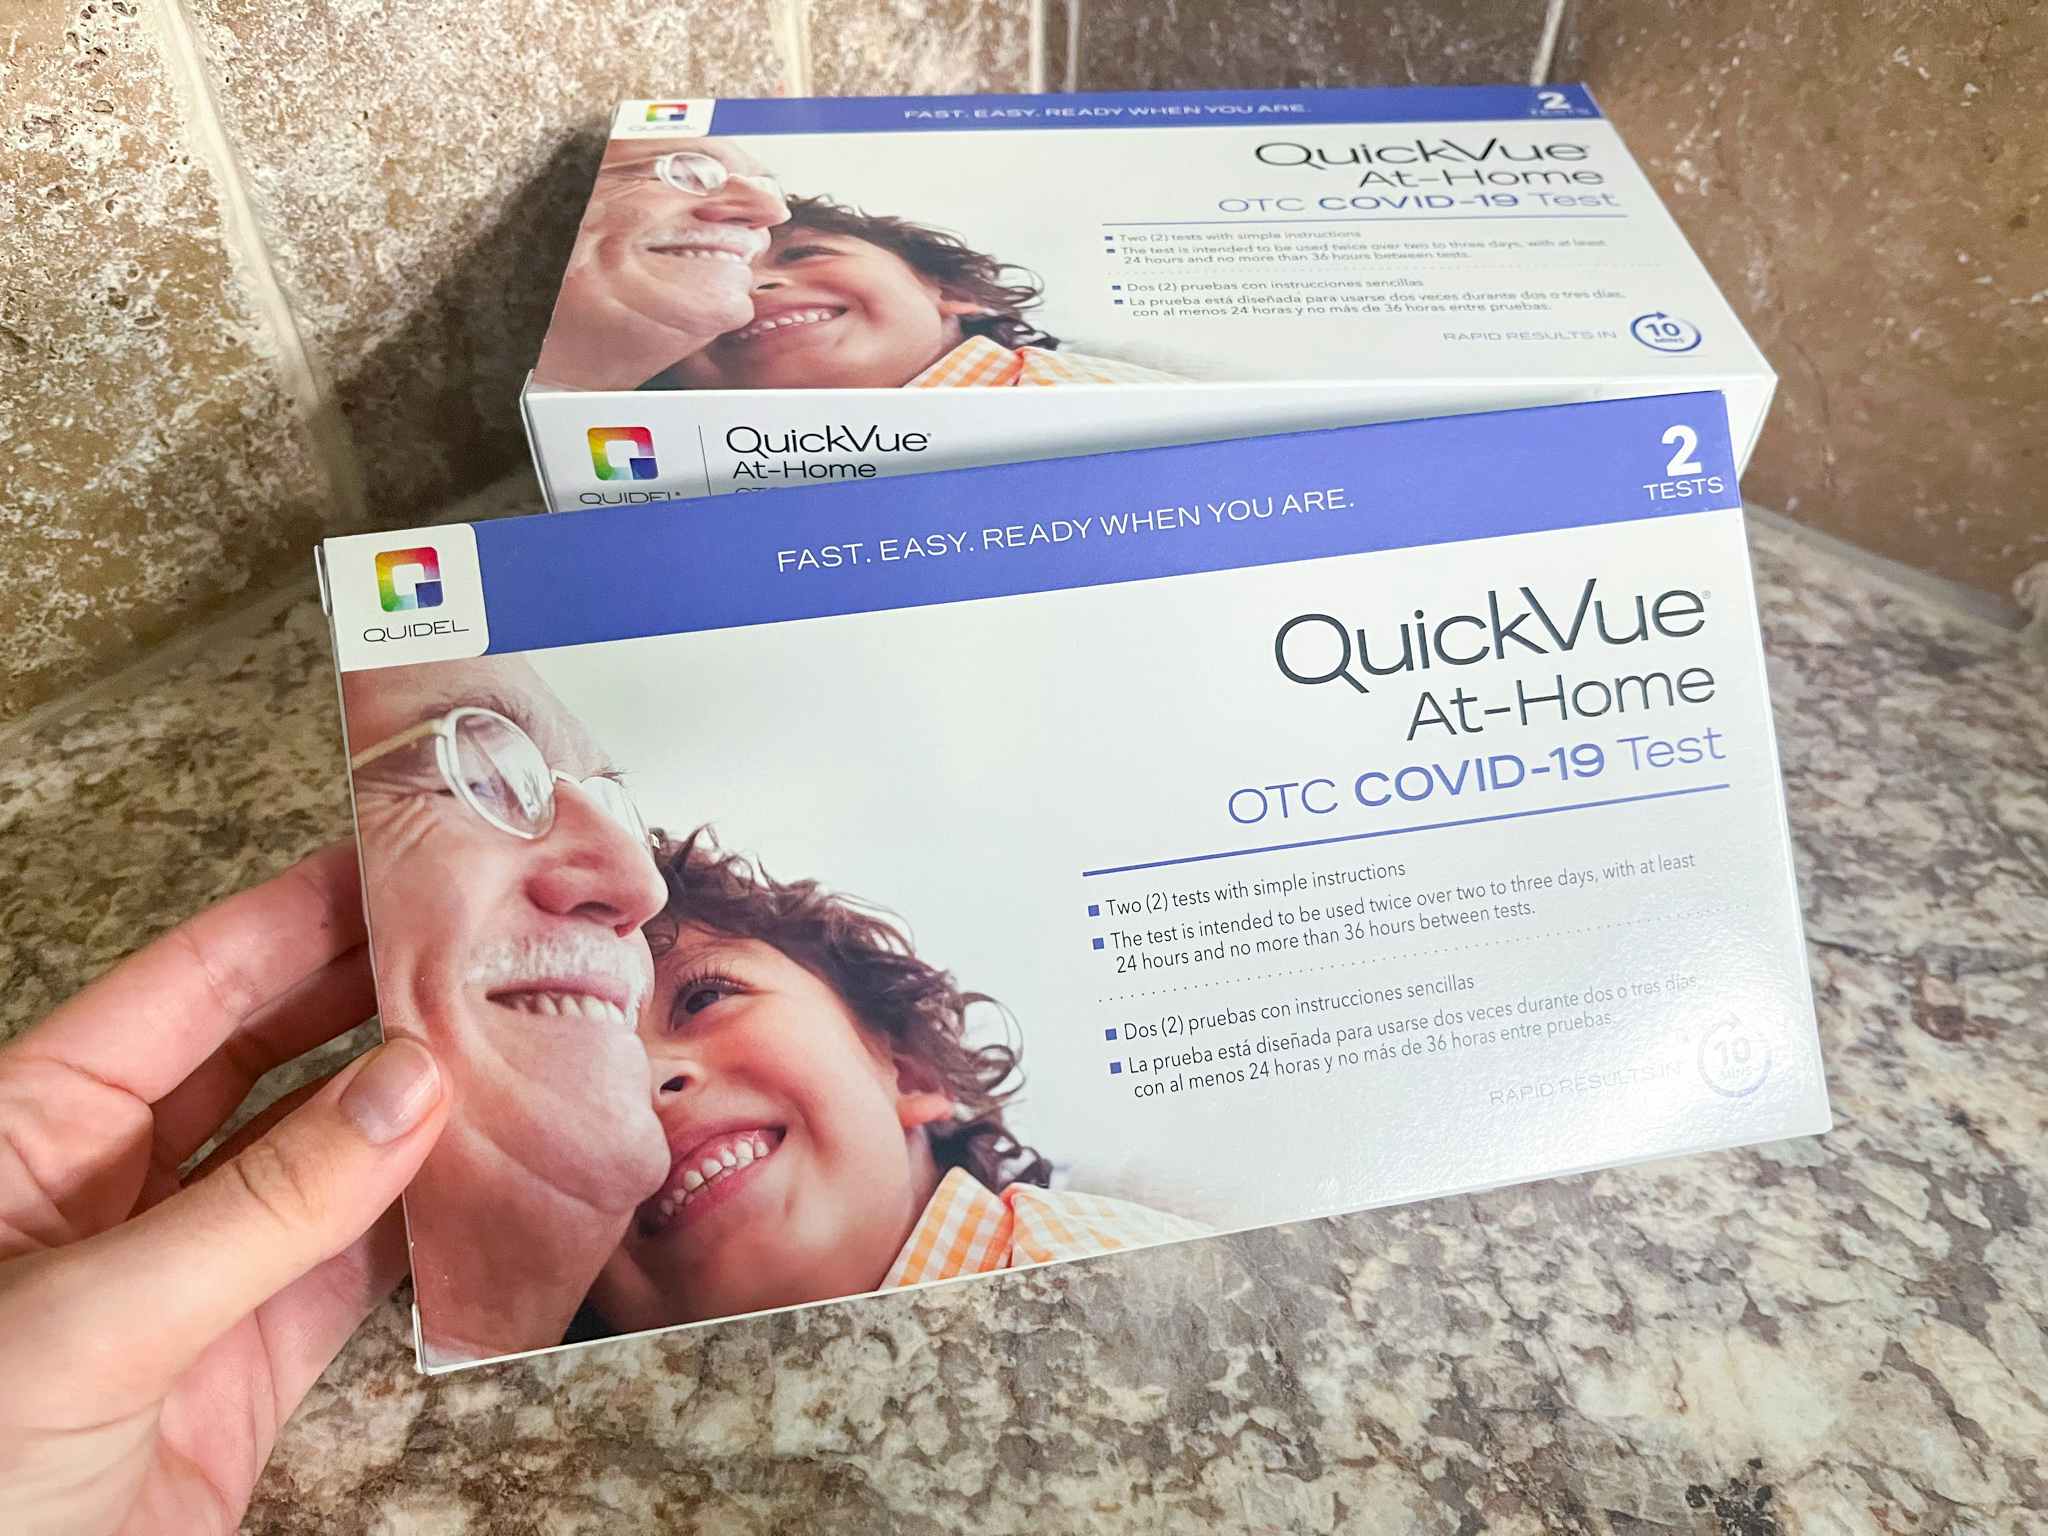 A person's hand holding a QuickVue At-Home COVID-19 test kit box in front of another test kit on a counter.